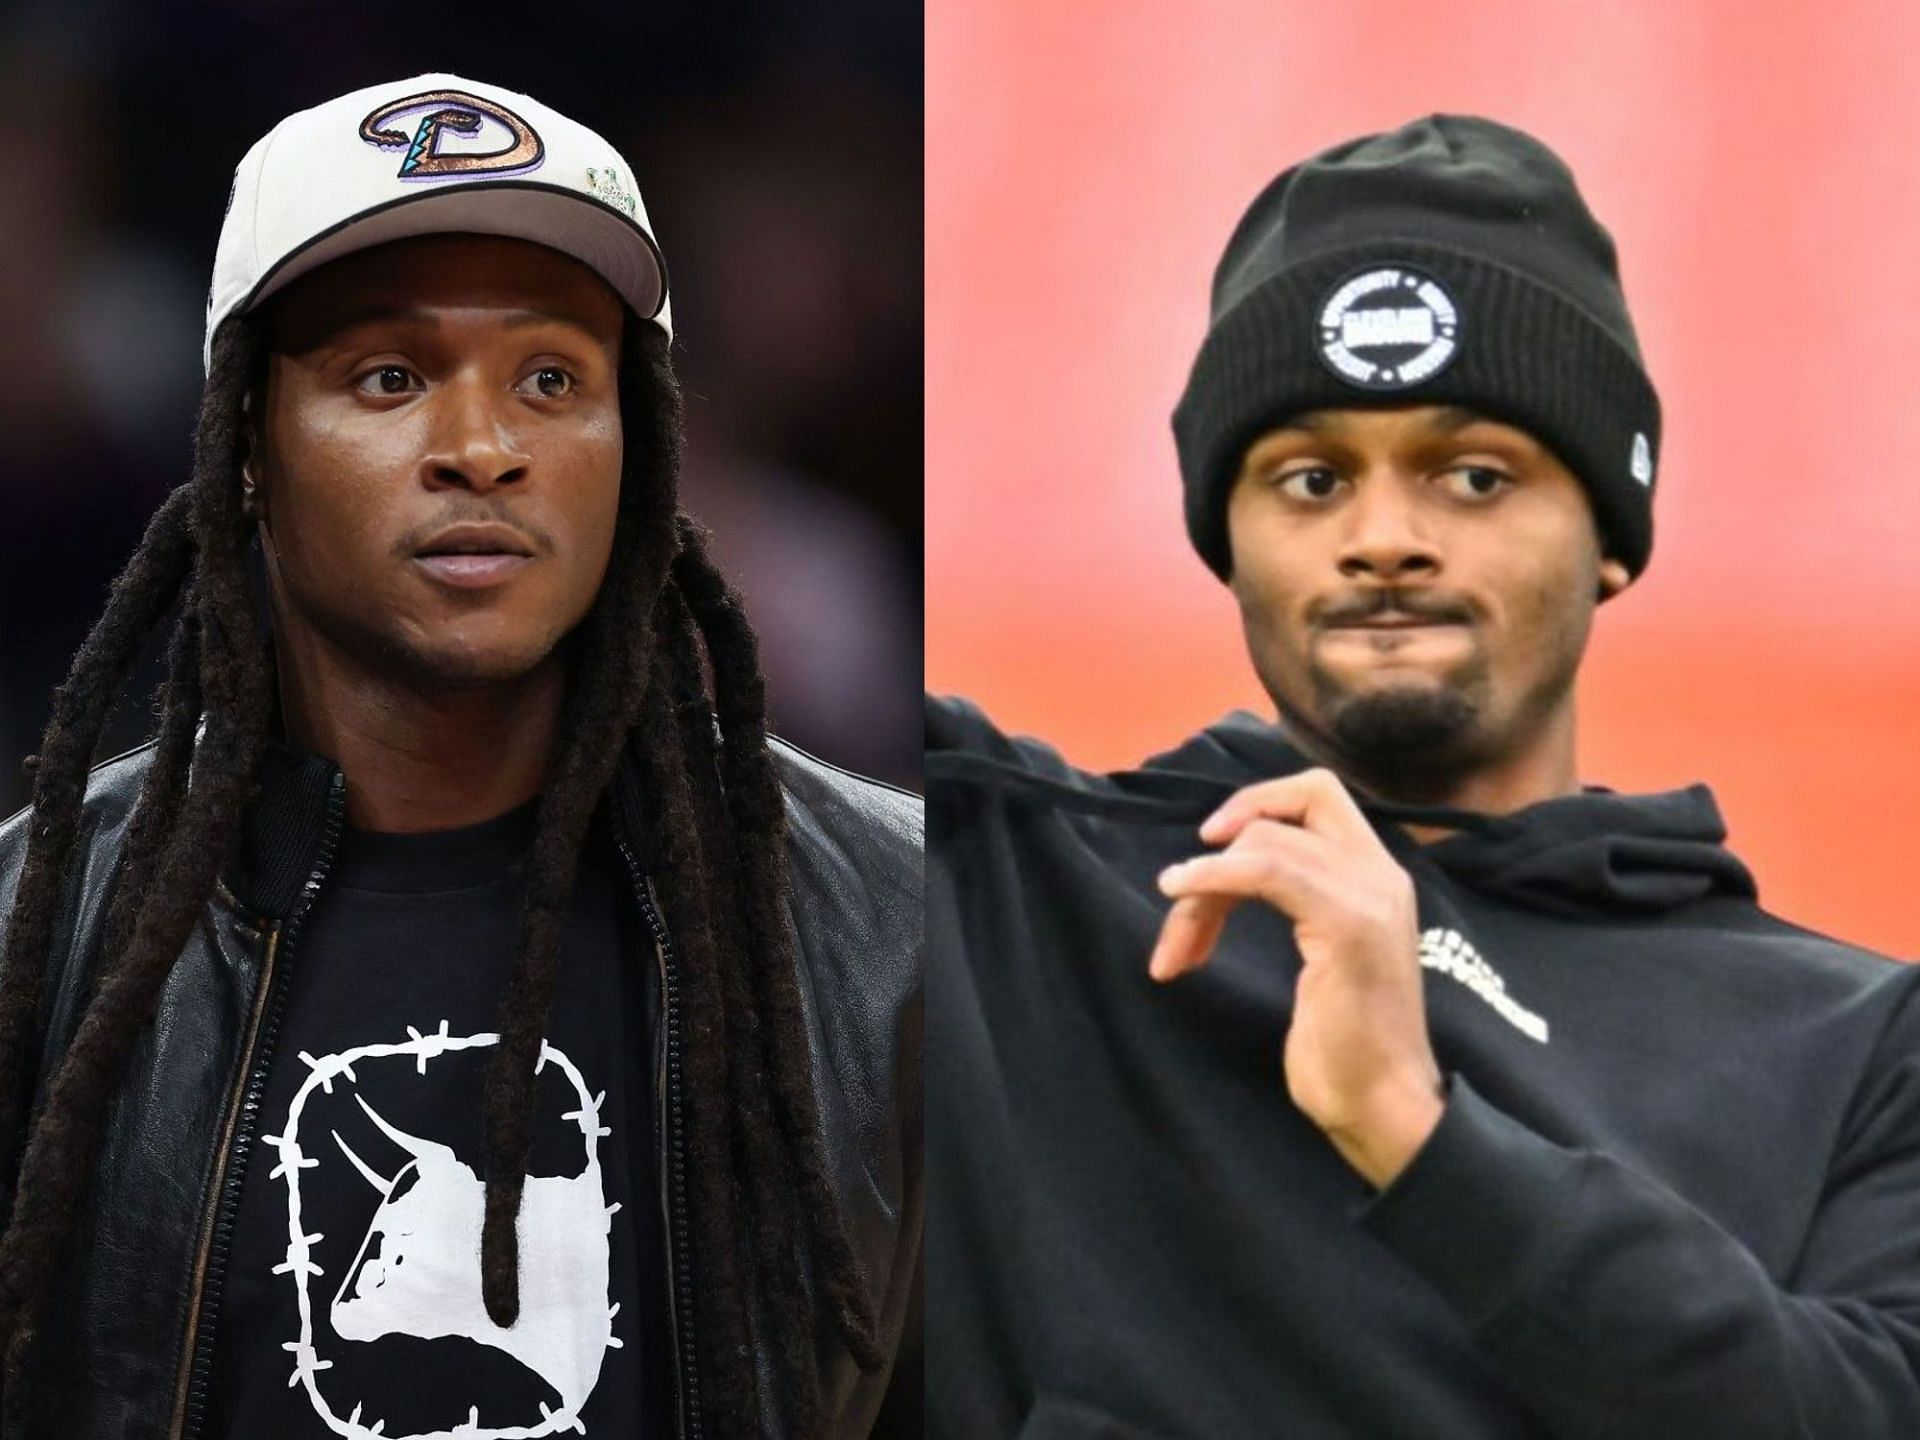 Deshaun Watson and DeAndre Hopkins set to potentially brush shoulders